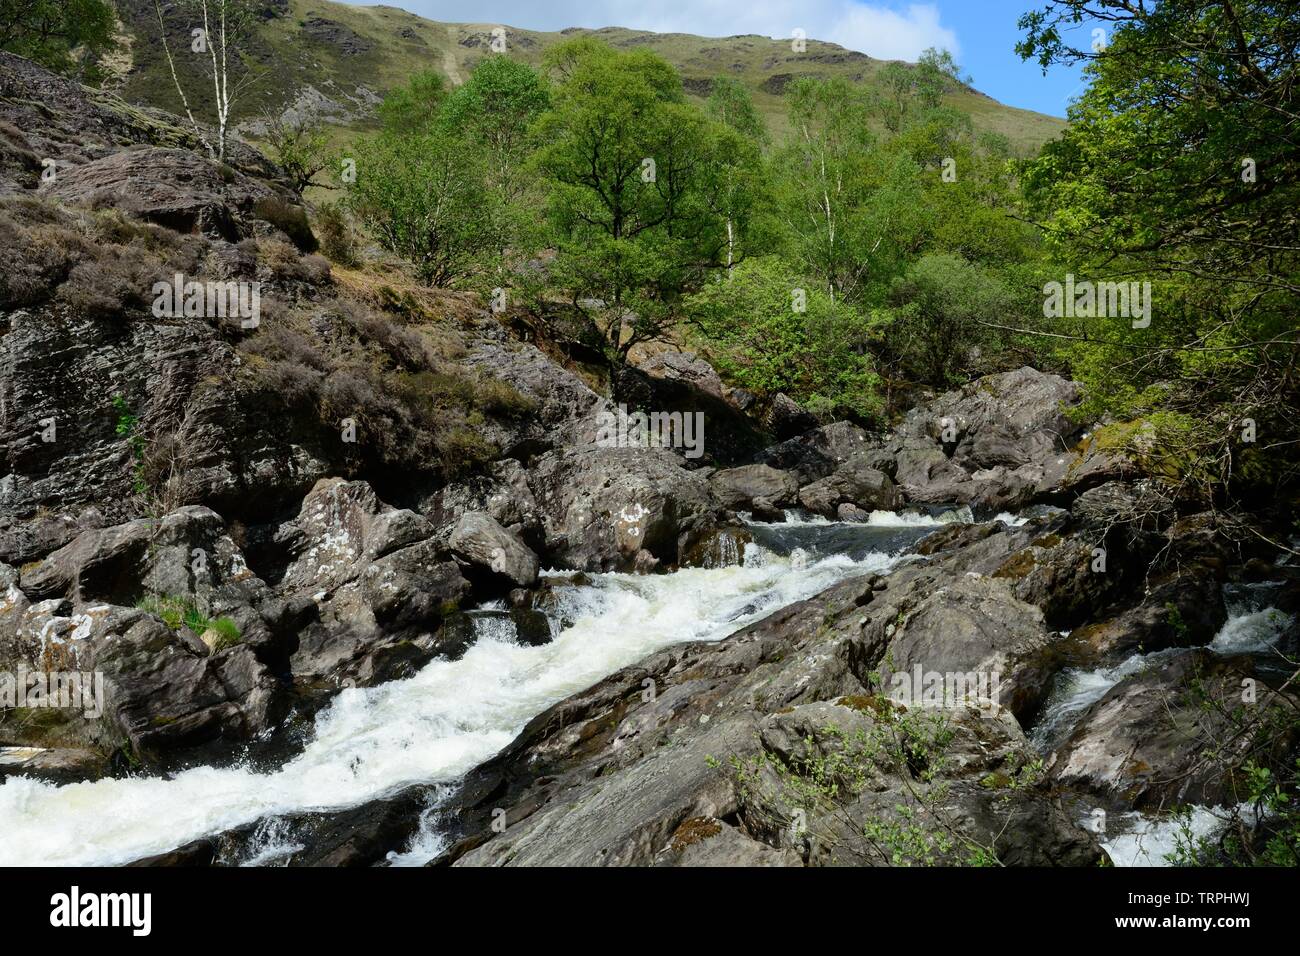 River Towy flowing through rocks rocky valley and trees in spring Gwenffryd Dinas Nature Reserve Upper Towy Valley Rhandirmwyn Carmarthenshire Wales Stock Photo